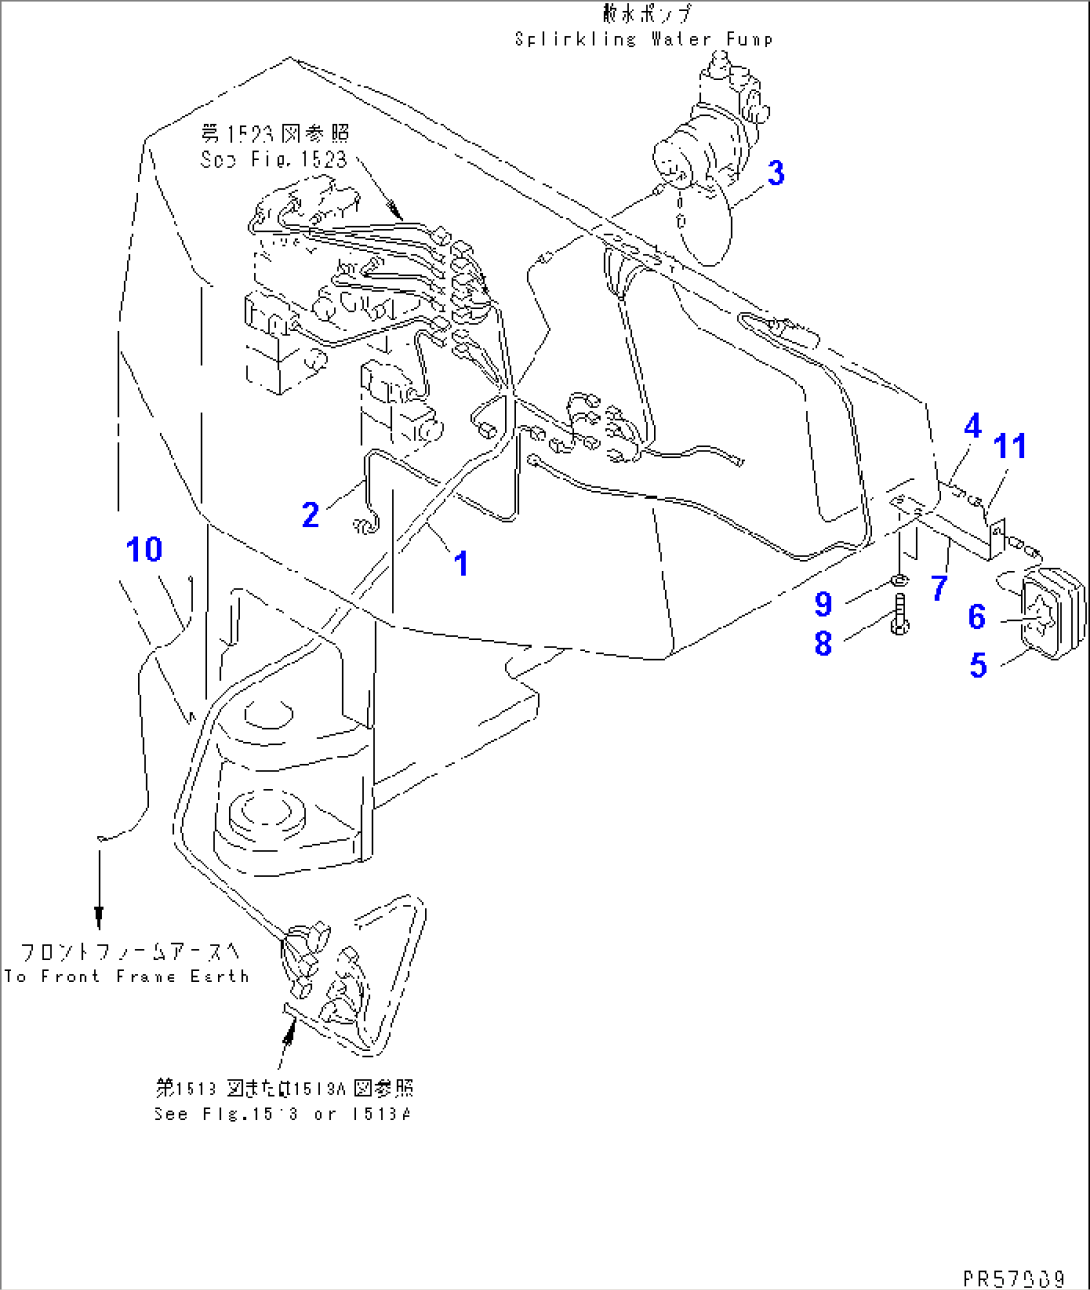 ELECTRICAL SYSTEM (REAR BODY LINE) (WITH 500MM ROTOR)(#1026-1100)